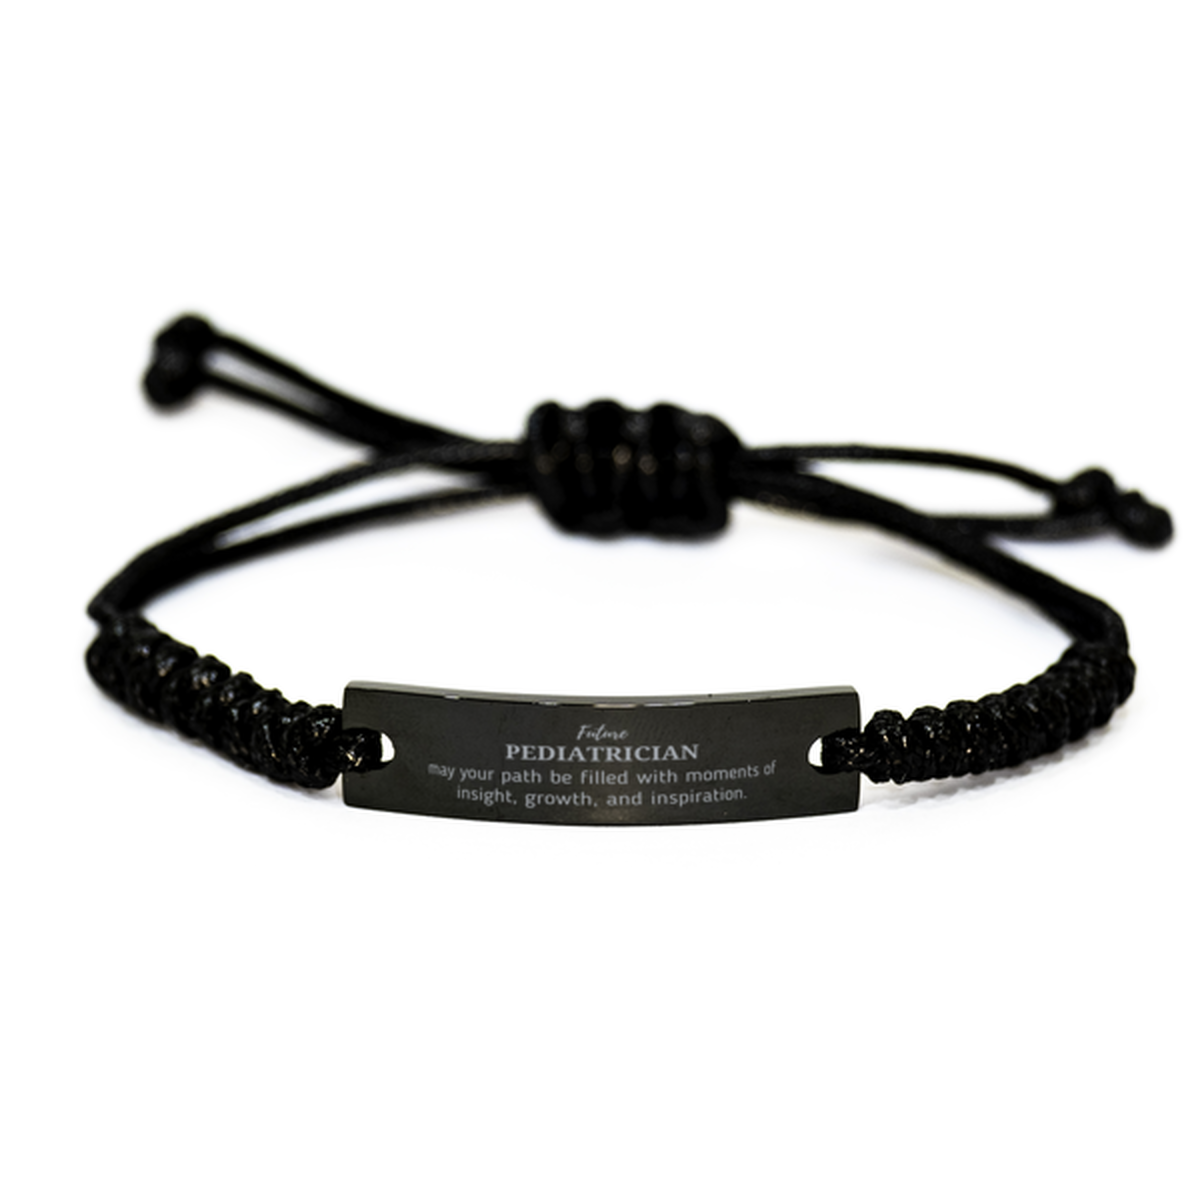 Future Pediatrician Gifts, May your path be filled with moments of insight, Graduation Gifts for New Pediatrician, Christmas Unique Black Rope Bracelet For Men, Women, Friends